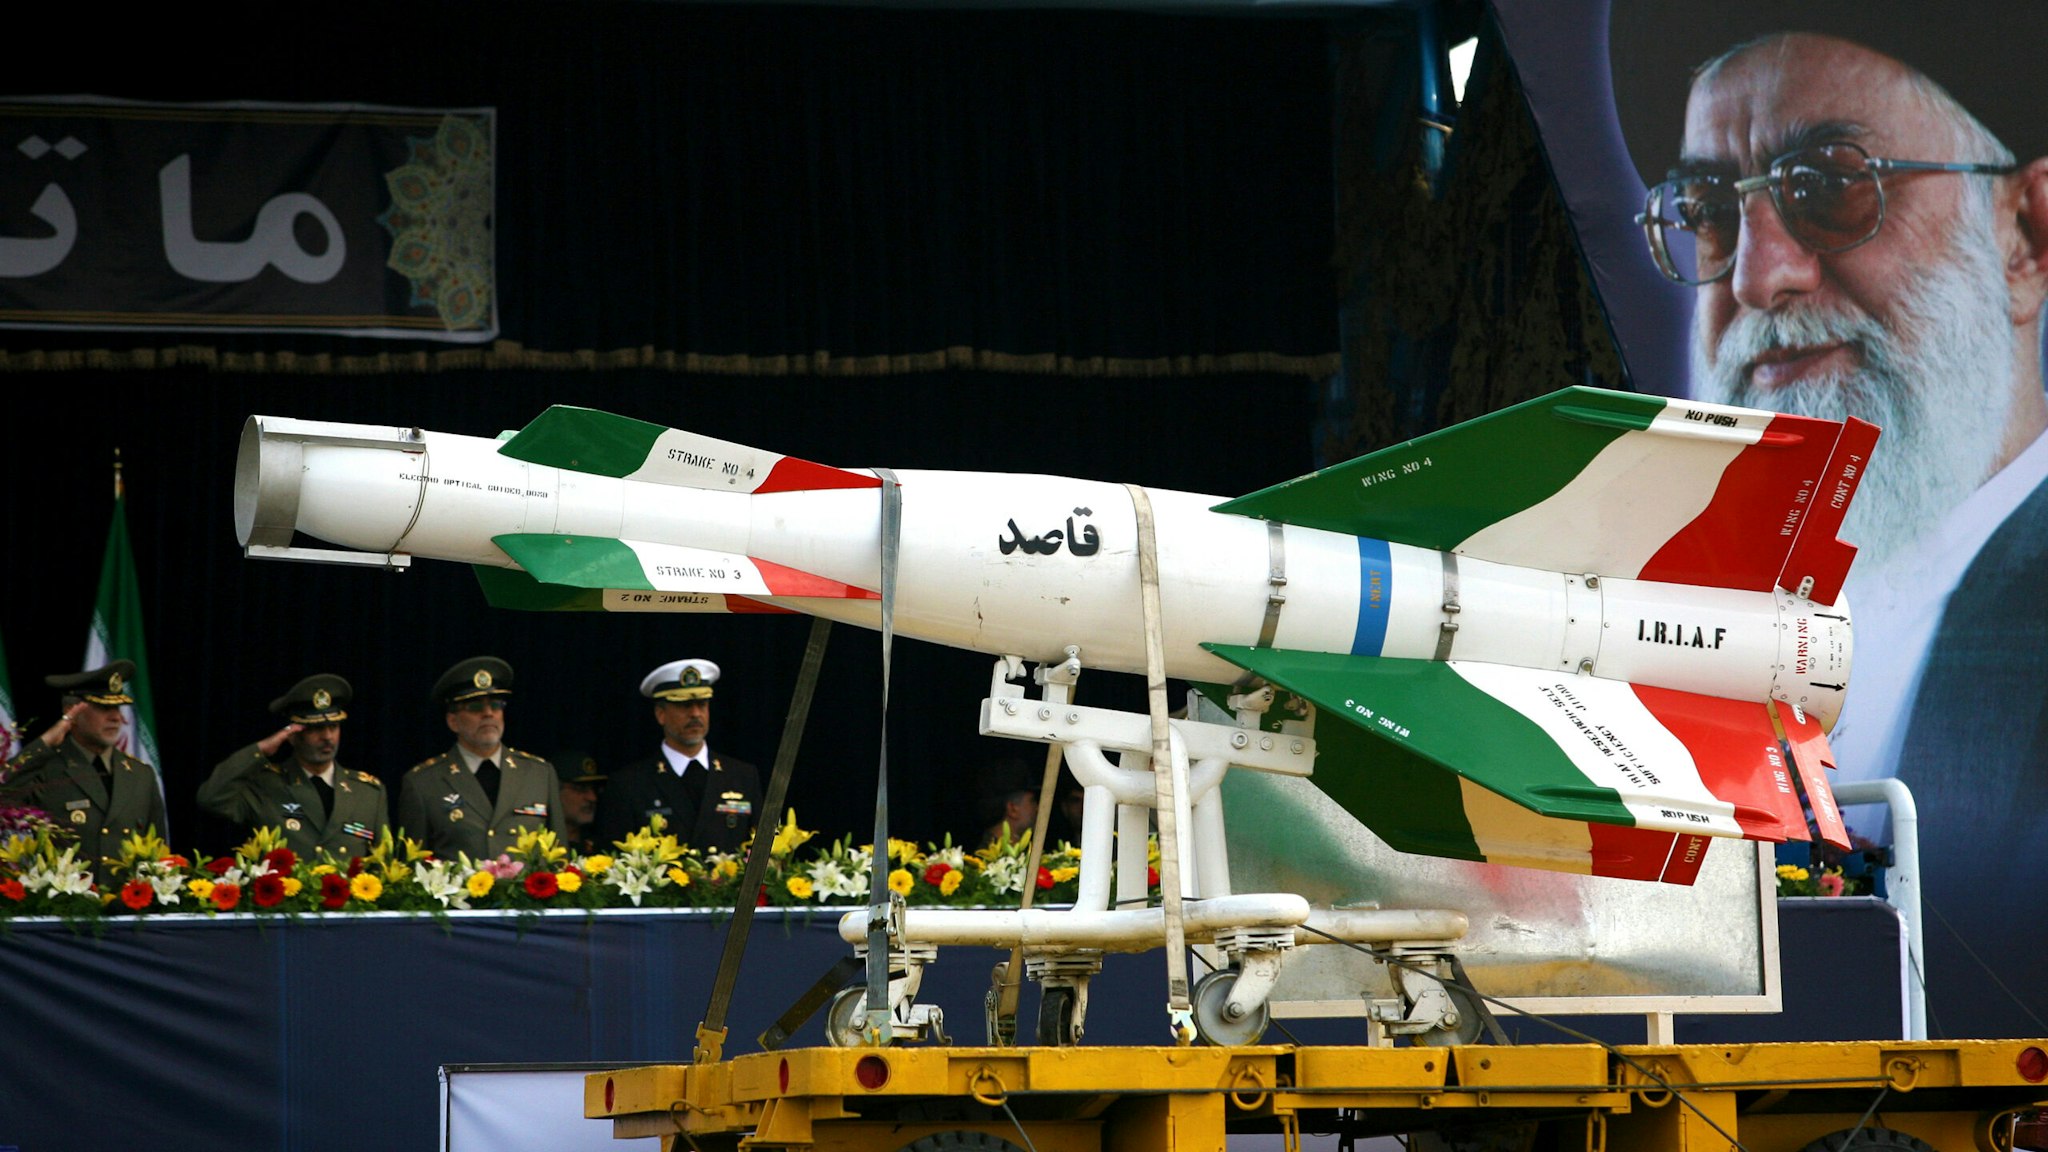 TEHRAN, IRAN - APRIL 17: An Iranian surface to surface Ghasedak missile is driven past portraits of Iran's late founder of the Islamic Republic, Ayatollah Ali khamenei (R), during the annual army day military parade on April 17, 2008 in Tehran, Iran. Ahmadinejad proclaimed today the country's army was a powerful deterrent to all enemies saying "No major power is able to jeopardize the Iranian nation's security and interests due to the Iranian people's power today, Iran's army, the Revolutionary Guards and the Basij would respond strongly to even the minimum aggression,"